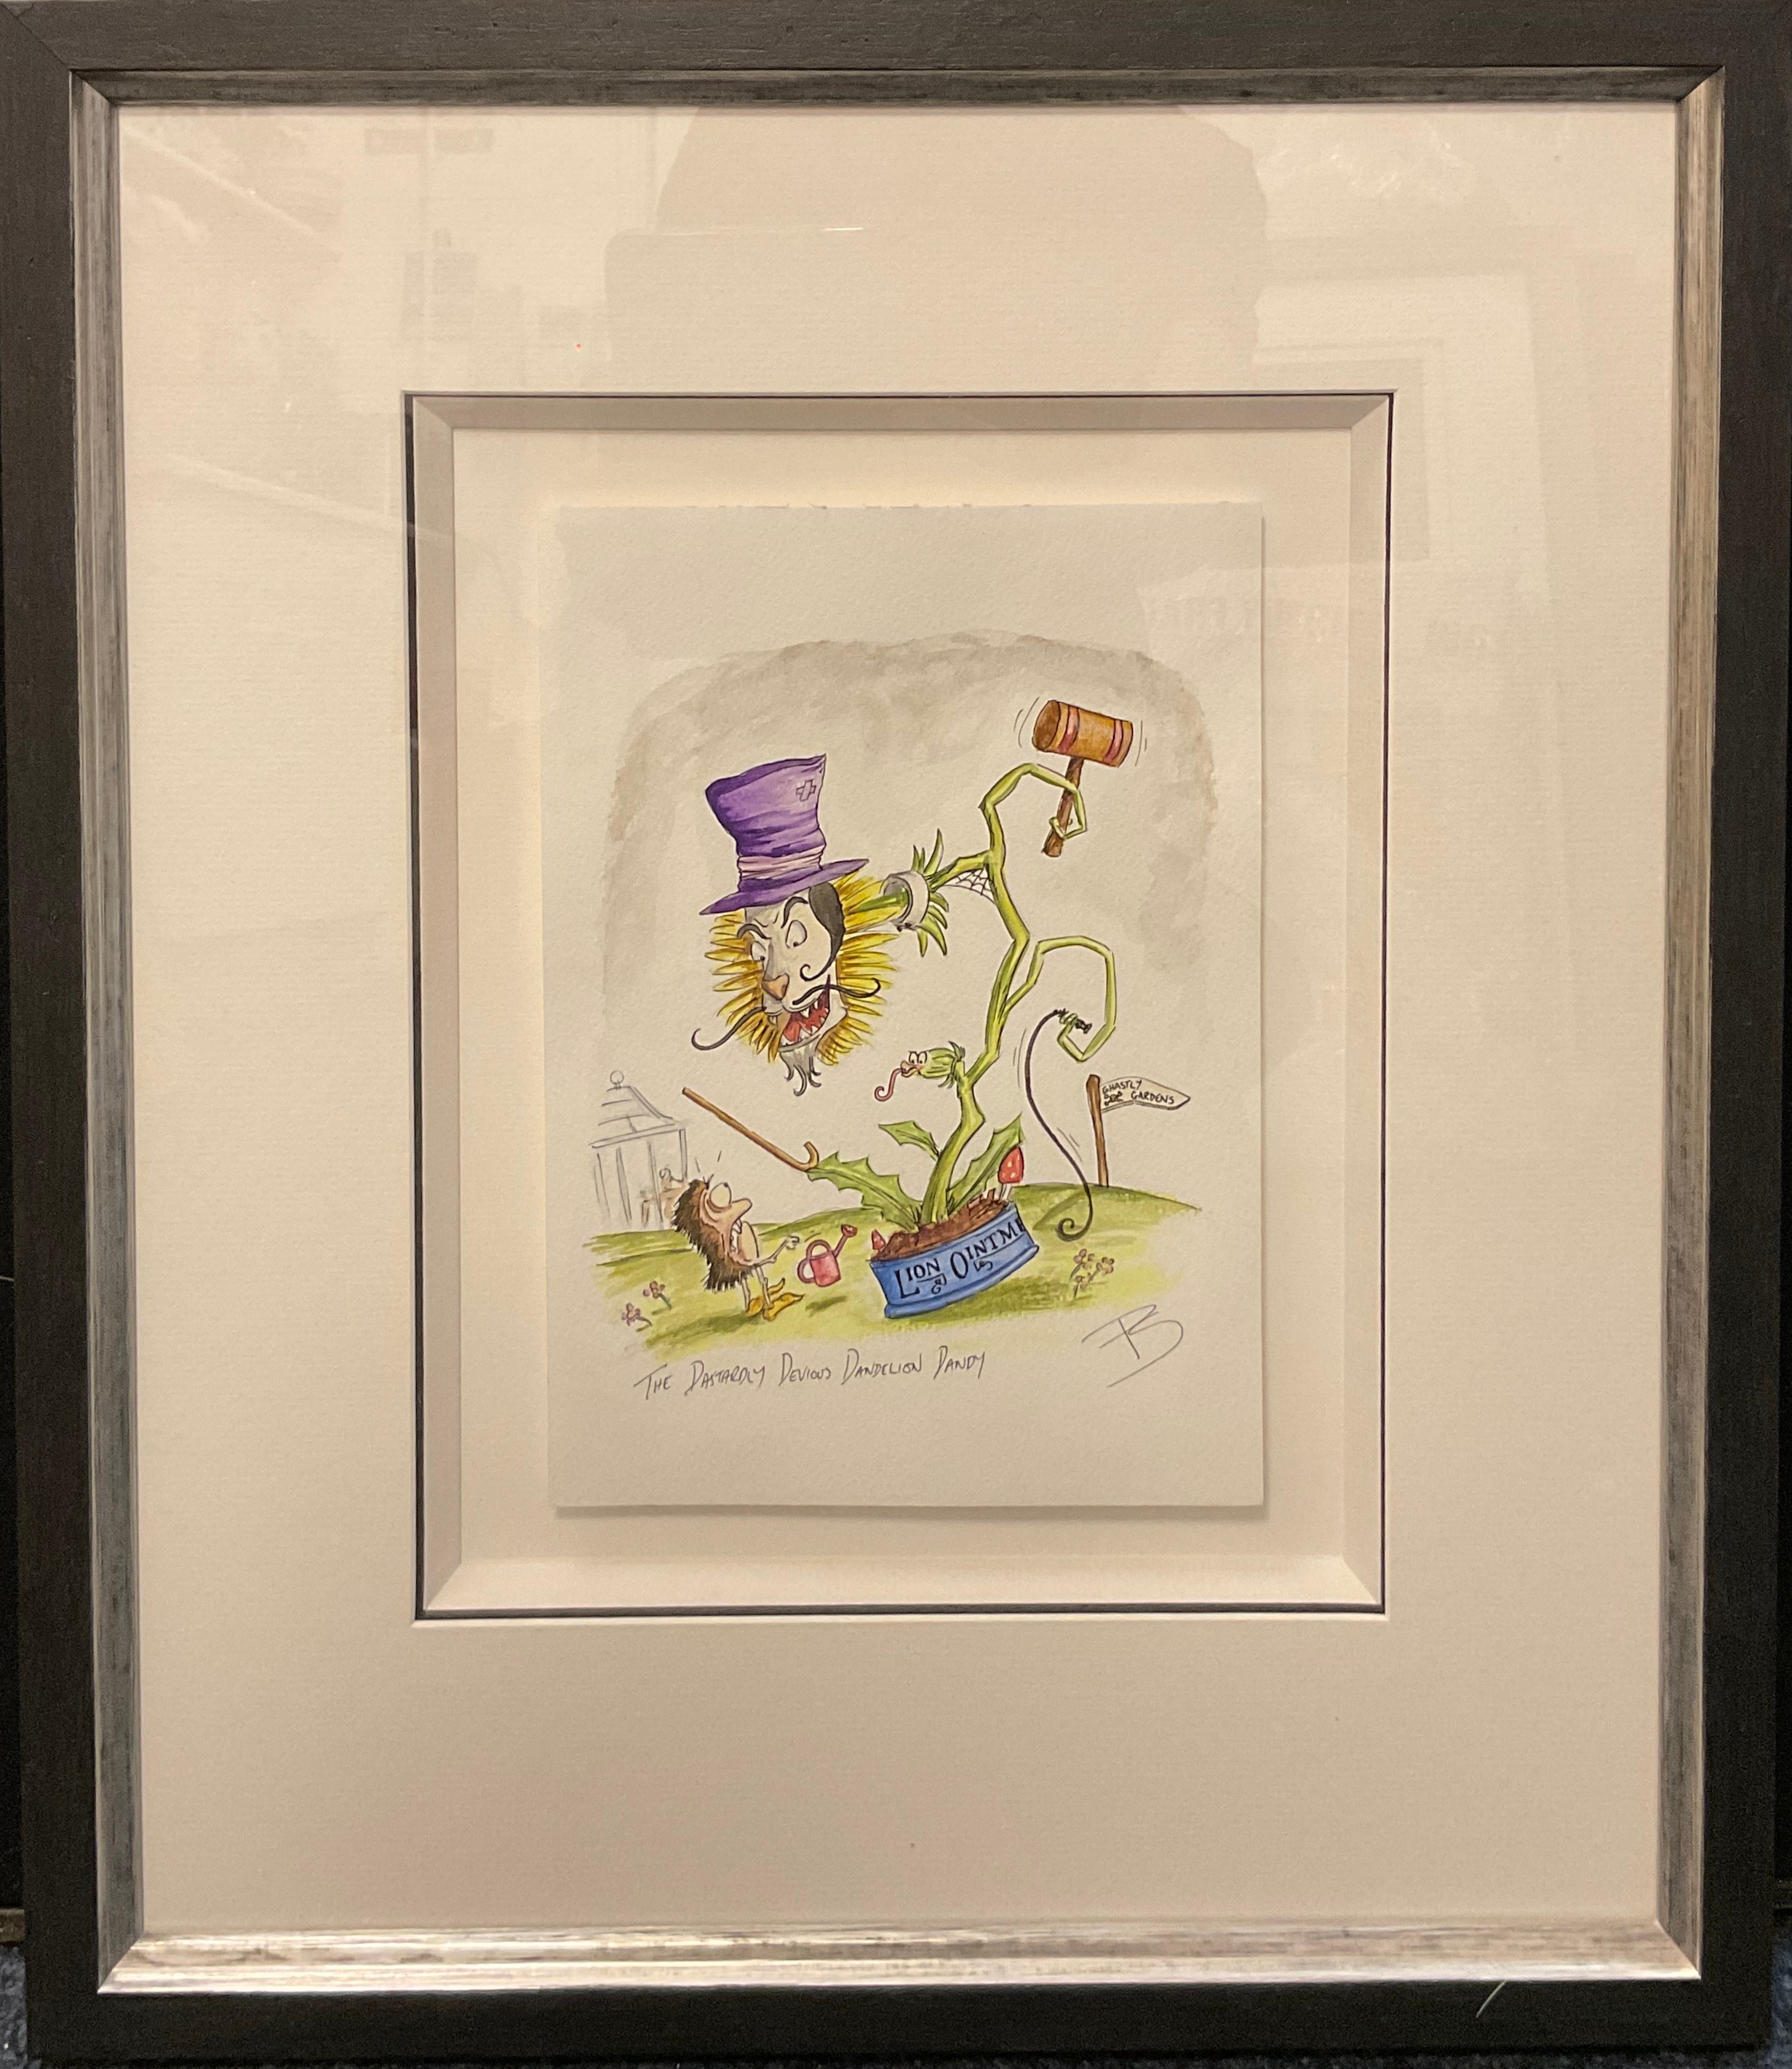 Peter Smith (British, bn. 1967), ‘The Dastardly Devious Dandelion Dandy’, signed with monogram, - Image 2 of 2